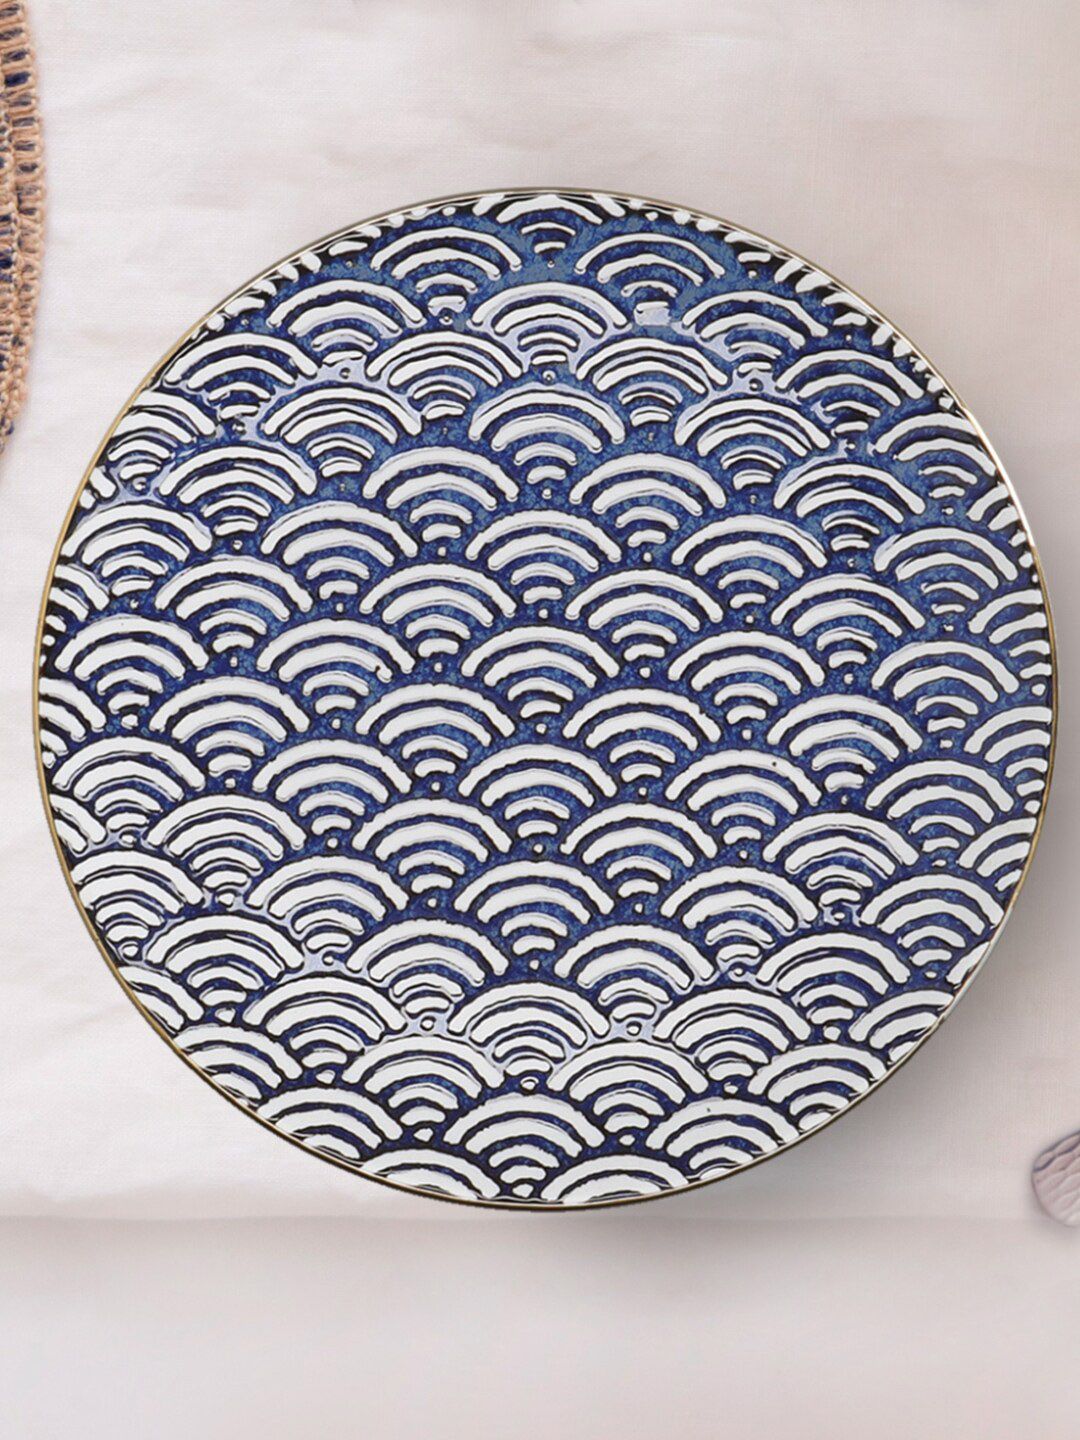 MIKASA 1 Piece Printed Porcelain Glossy Plate Price in India